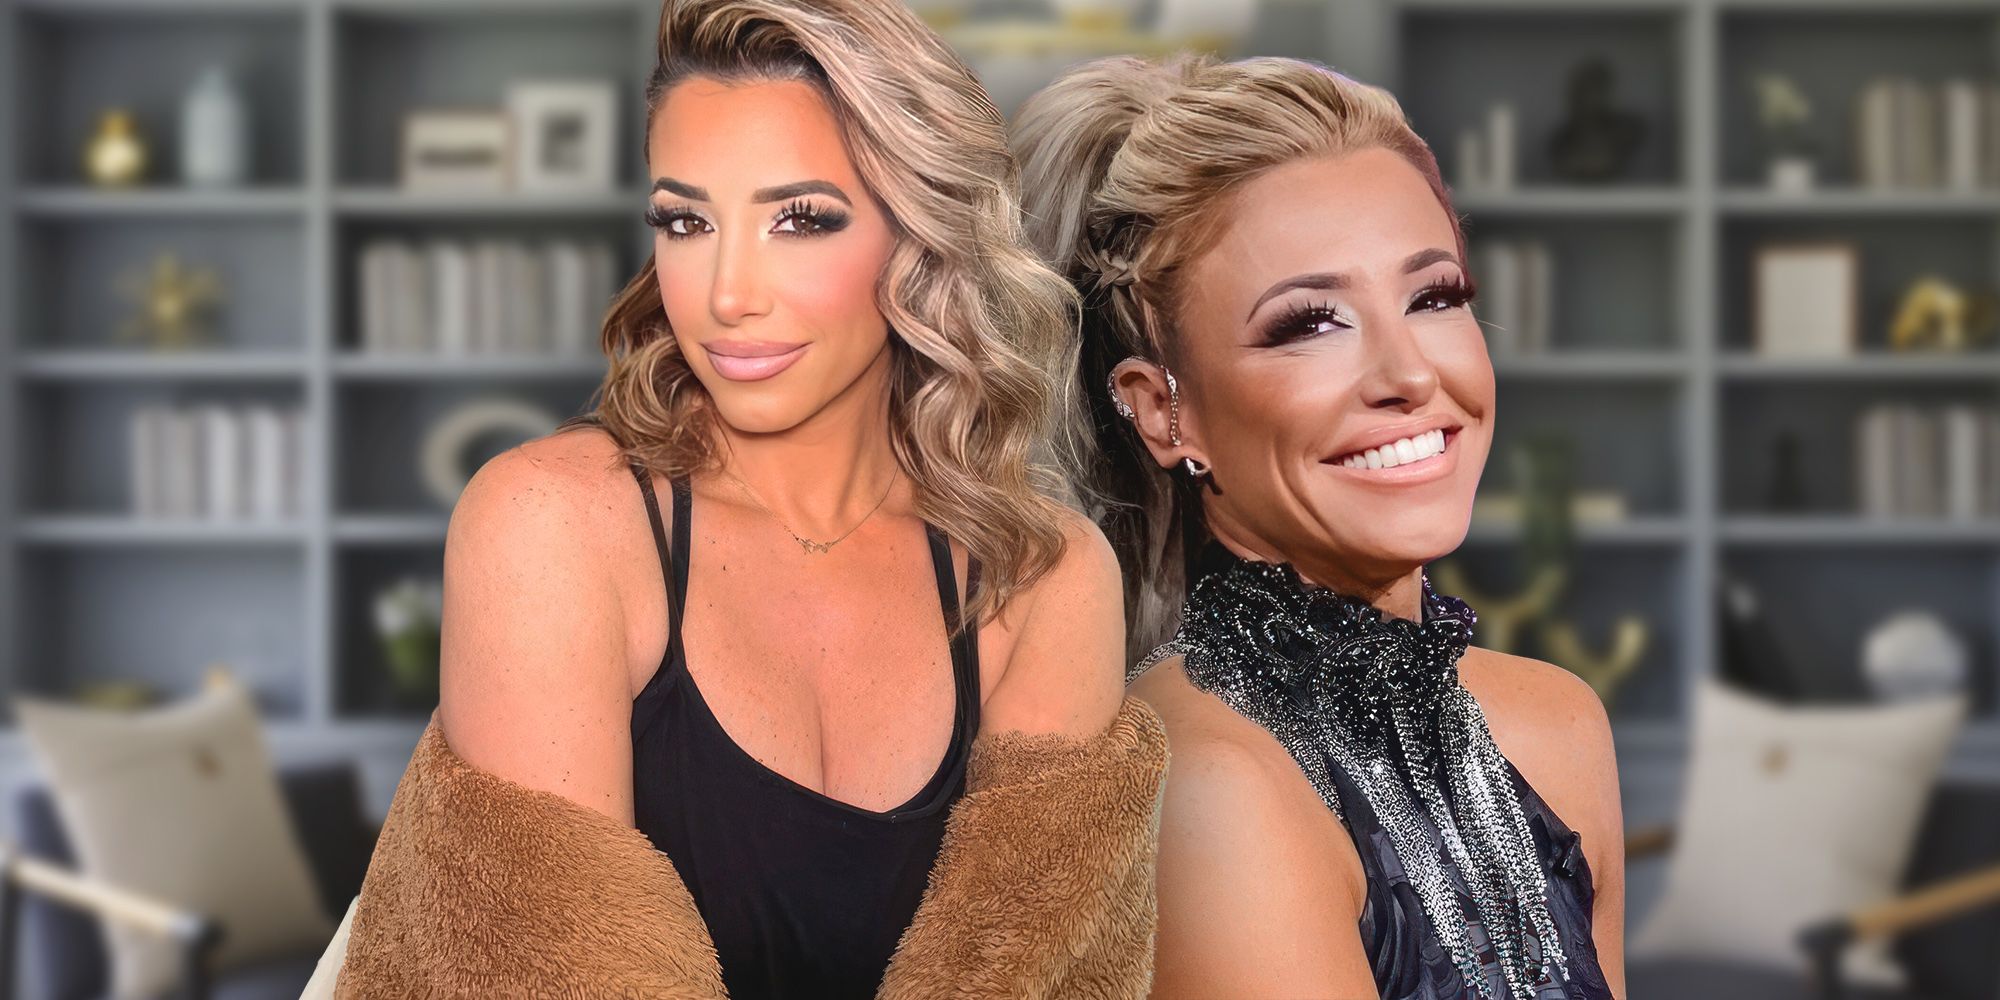 Side by side images of RHONJ's Danielle Cabral smiling